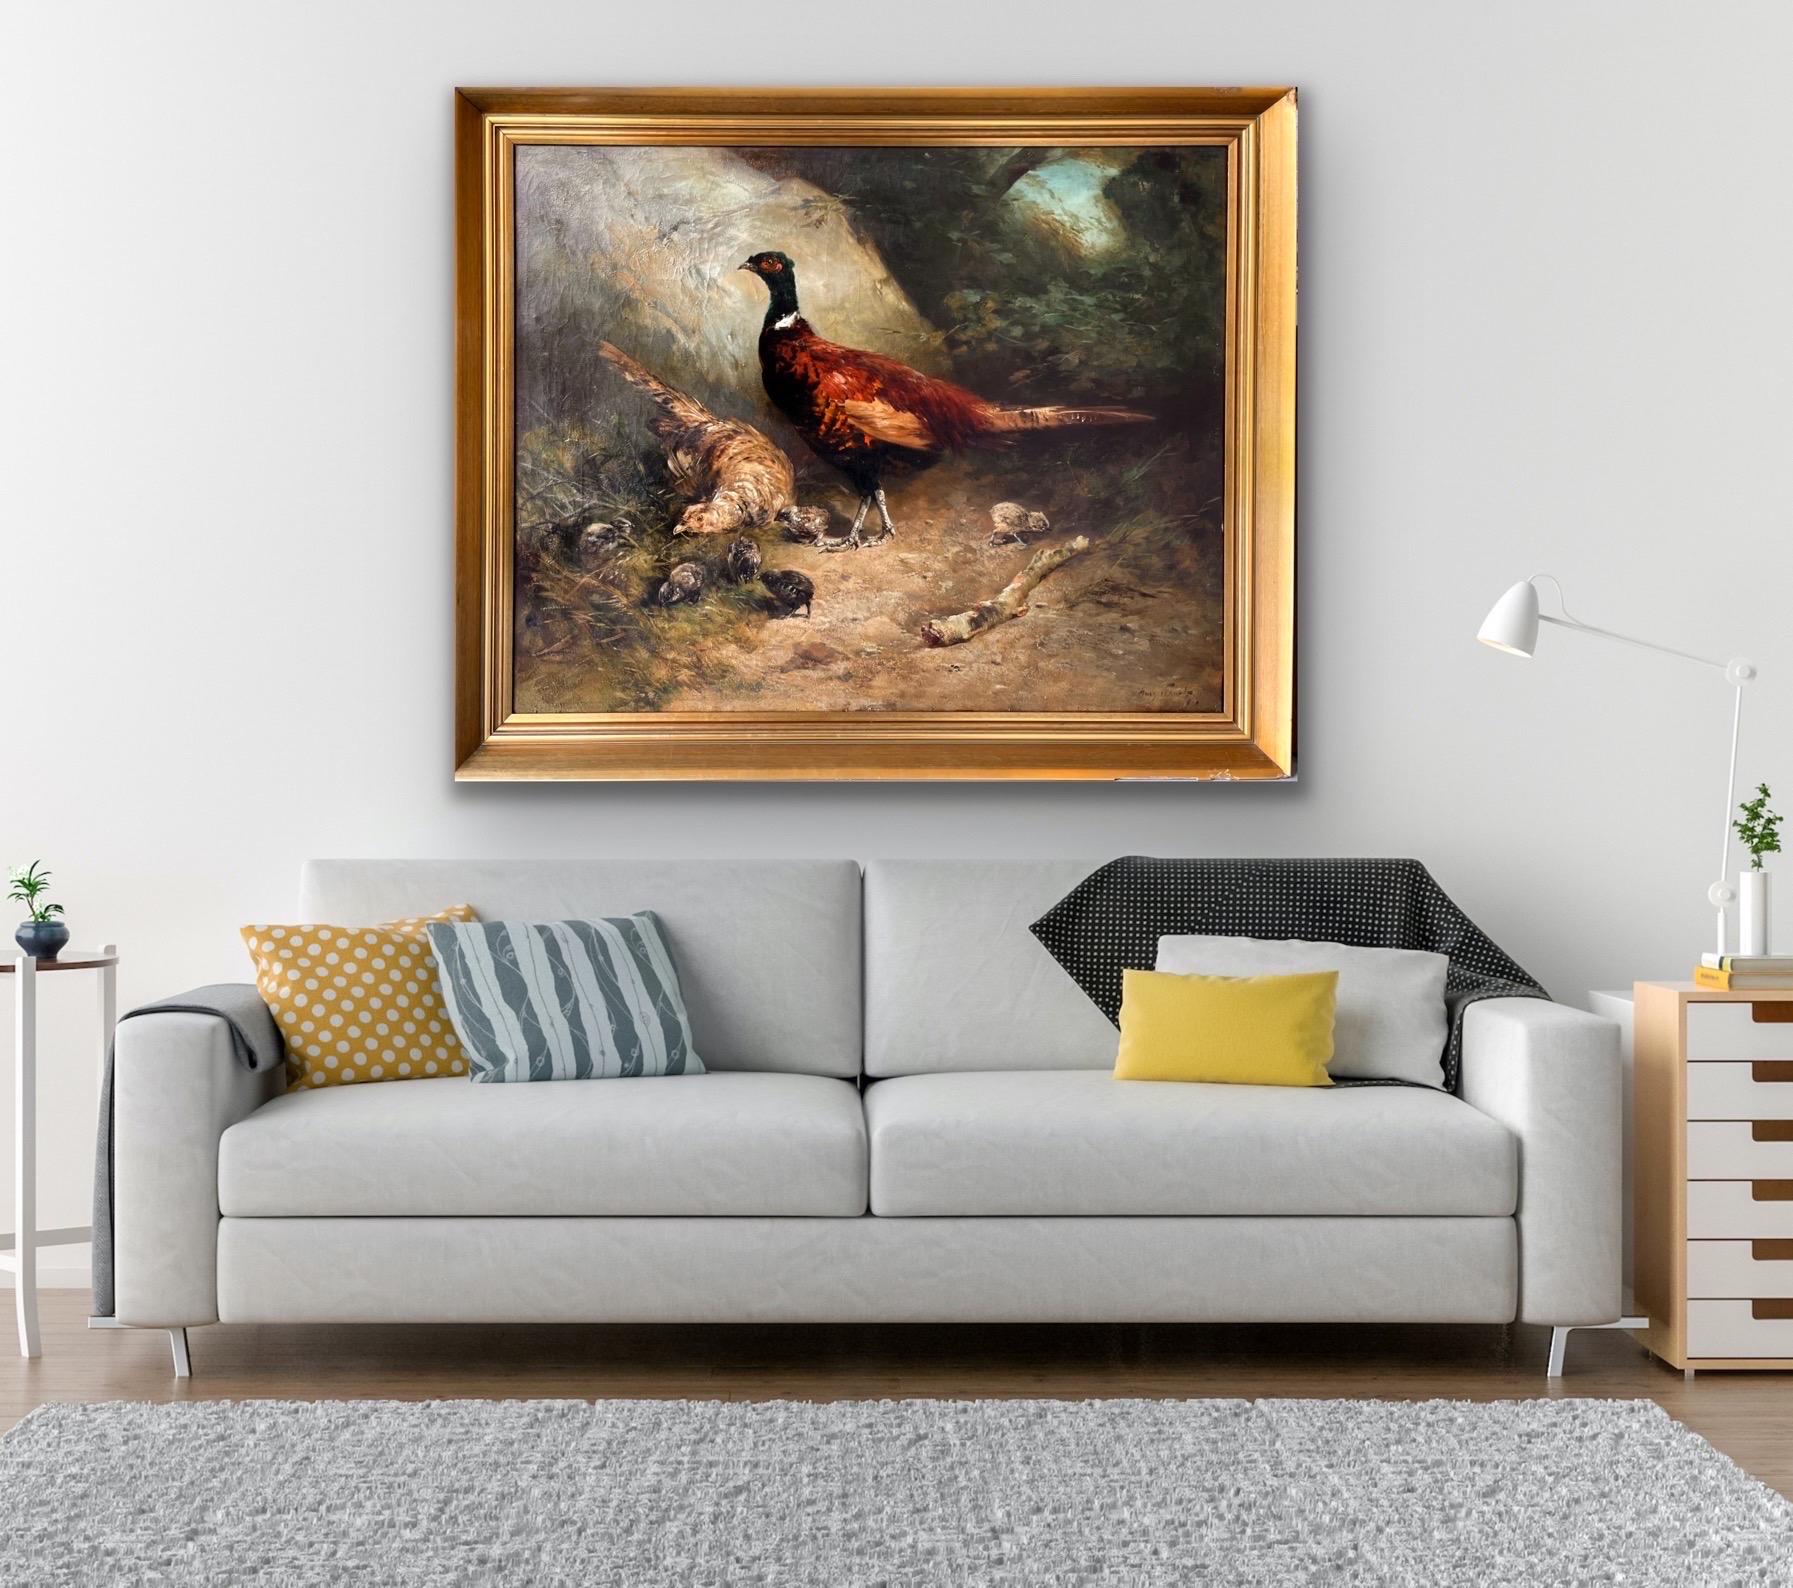 Huge 19th century romantic painting Pheasant with their chicks in a forest 6